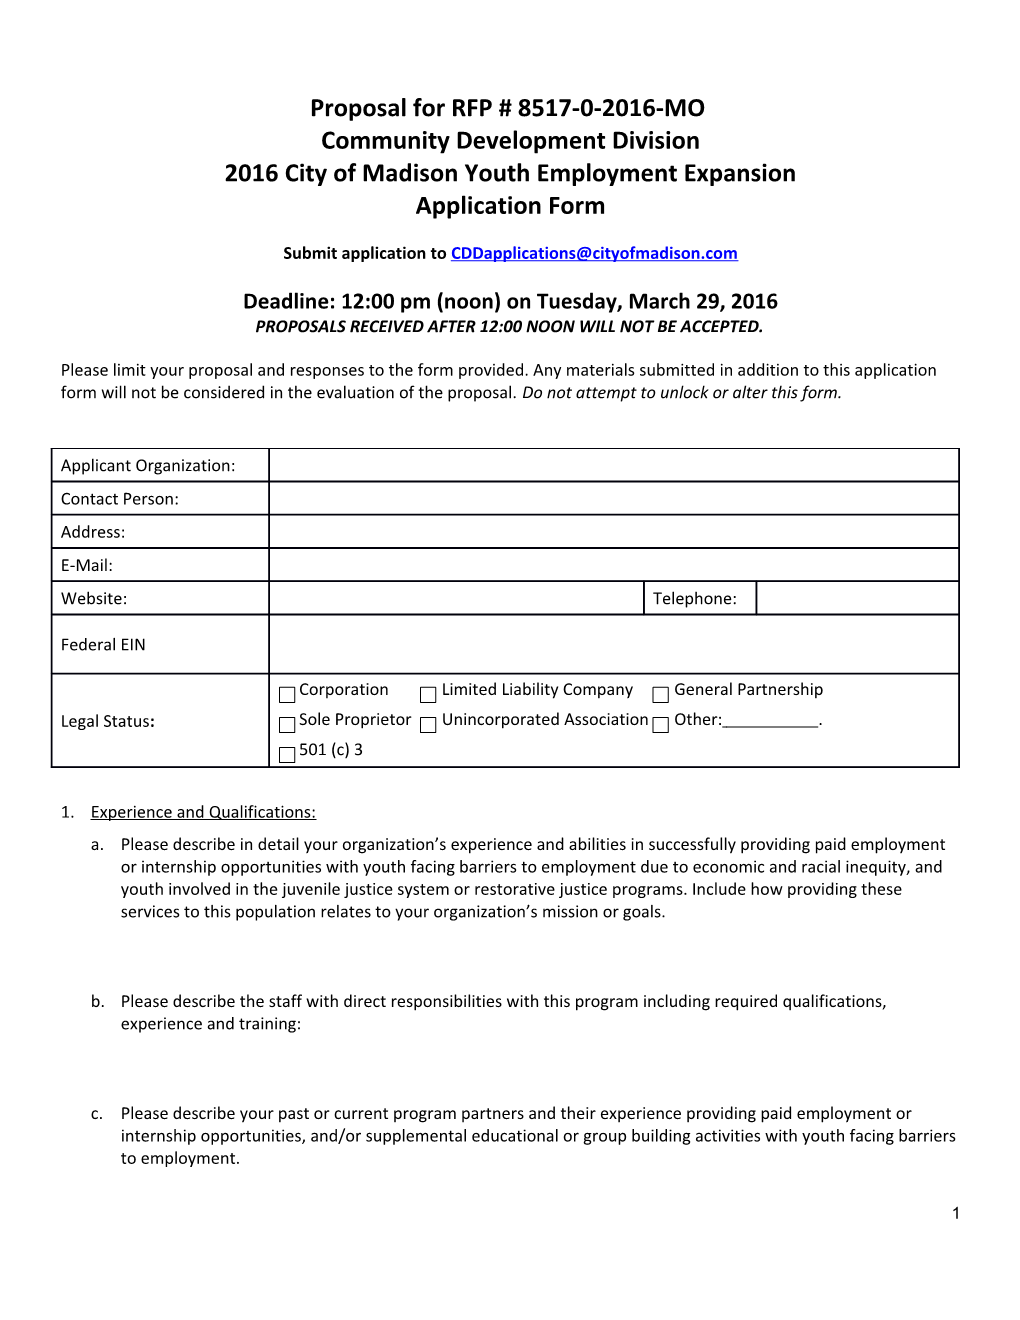 2016 City of Madison Youth Employment Expansion